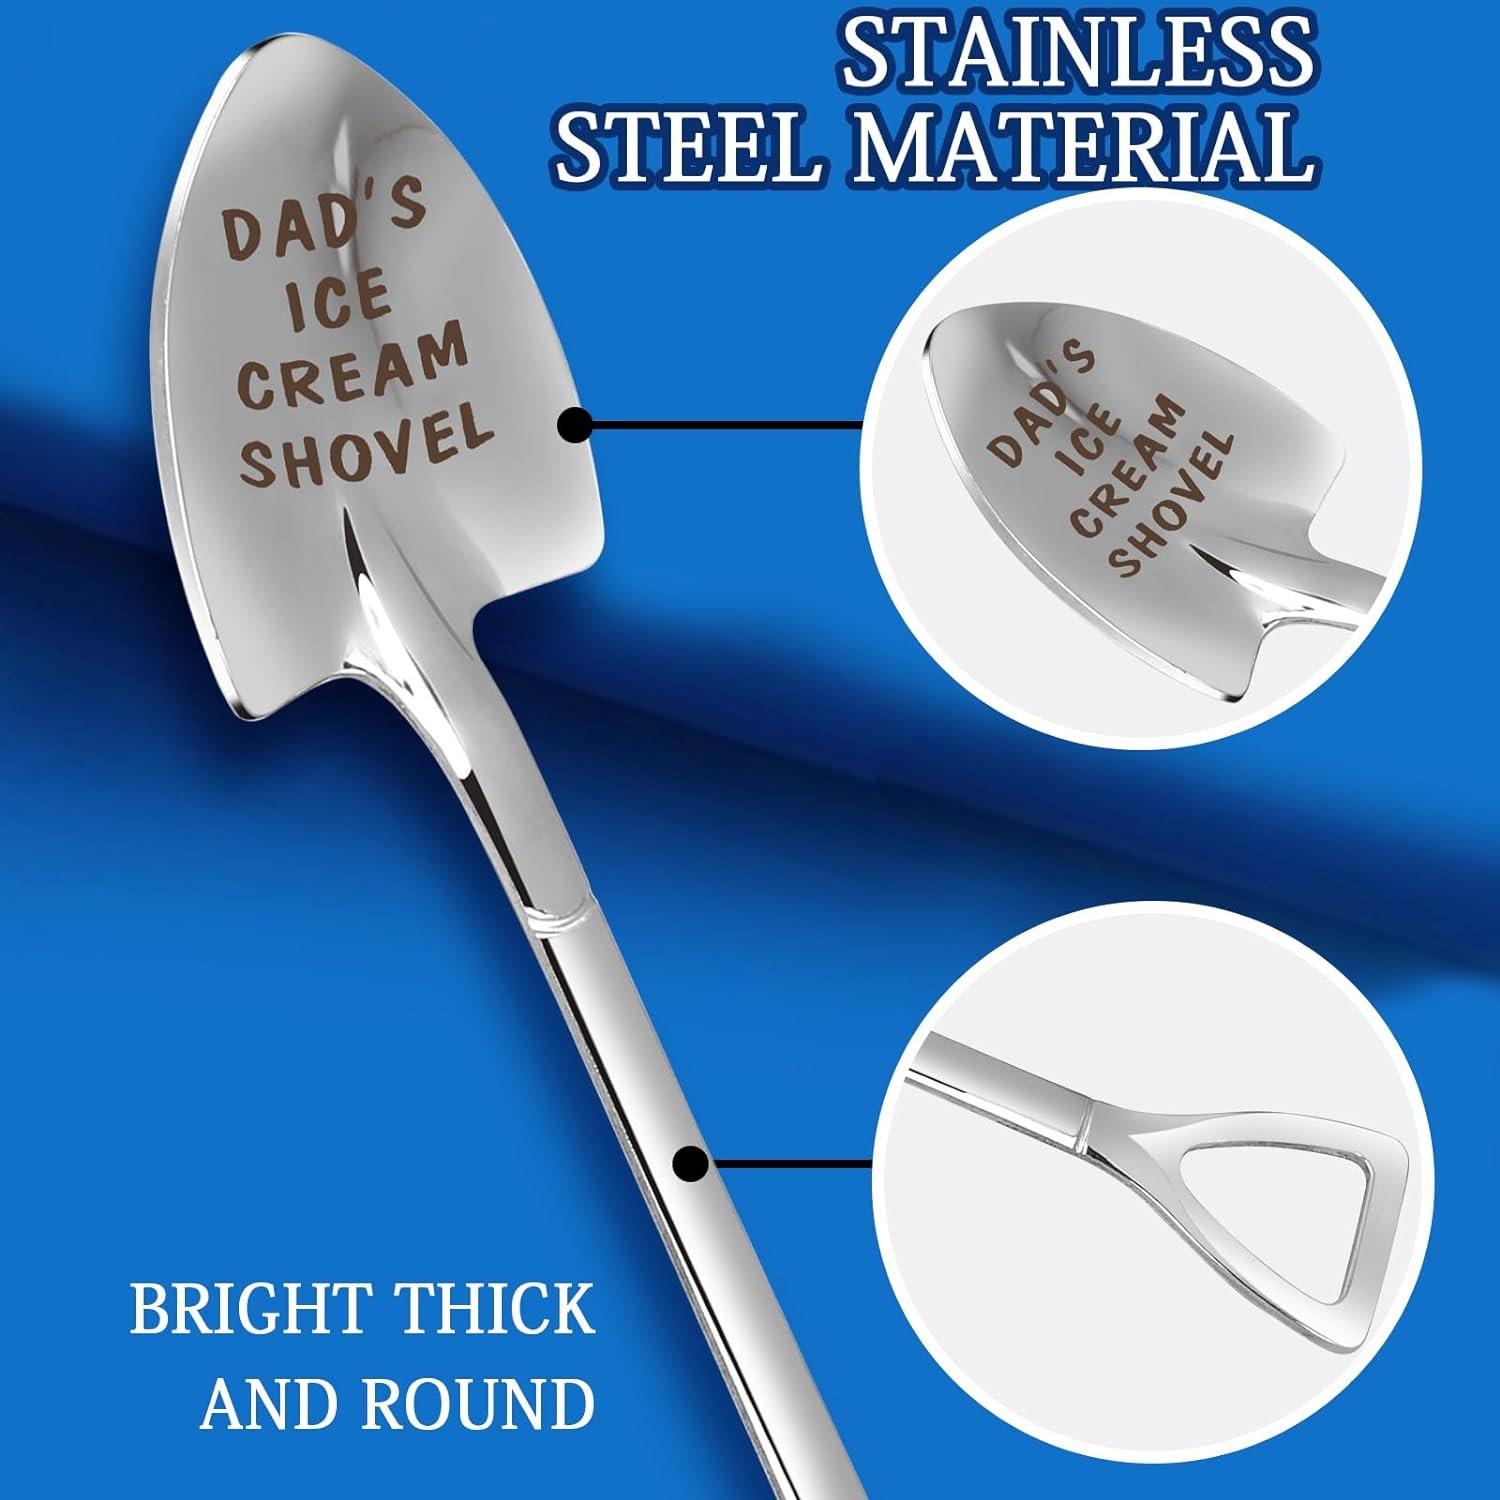 Gifts for Dad fathers day dad gifts Men Ice Cream Spoon Scoop for Ice Cream Lovers, Fathers Day Gifts for men Funny Engraved Stainless Steel Spoon Shovel, Birthday Fathers Gifts